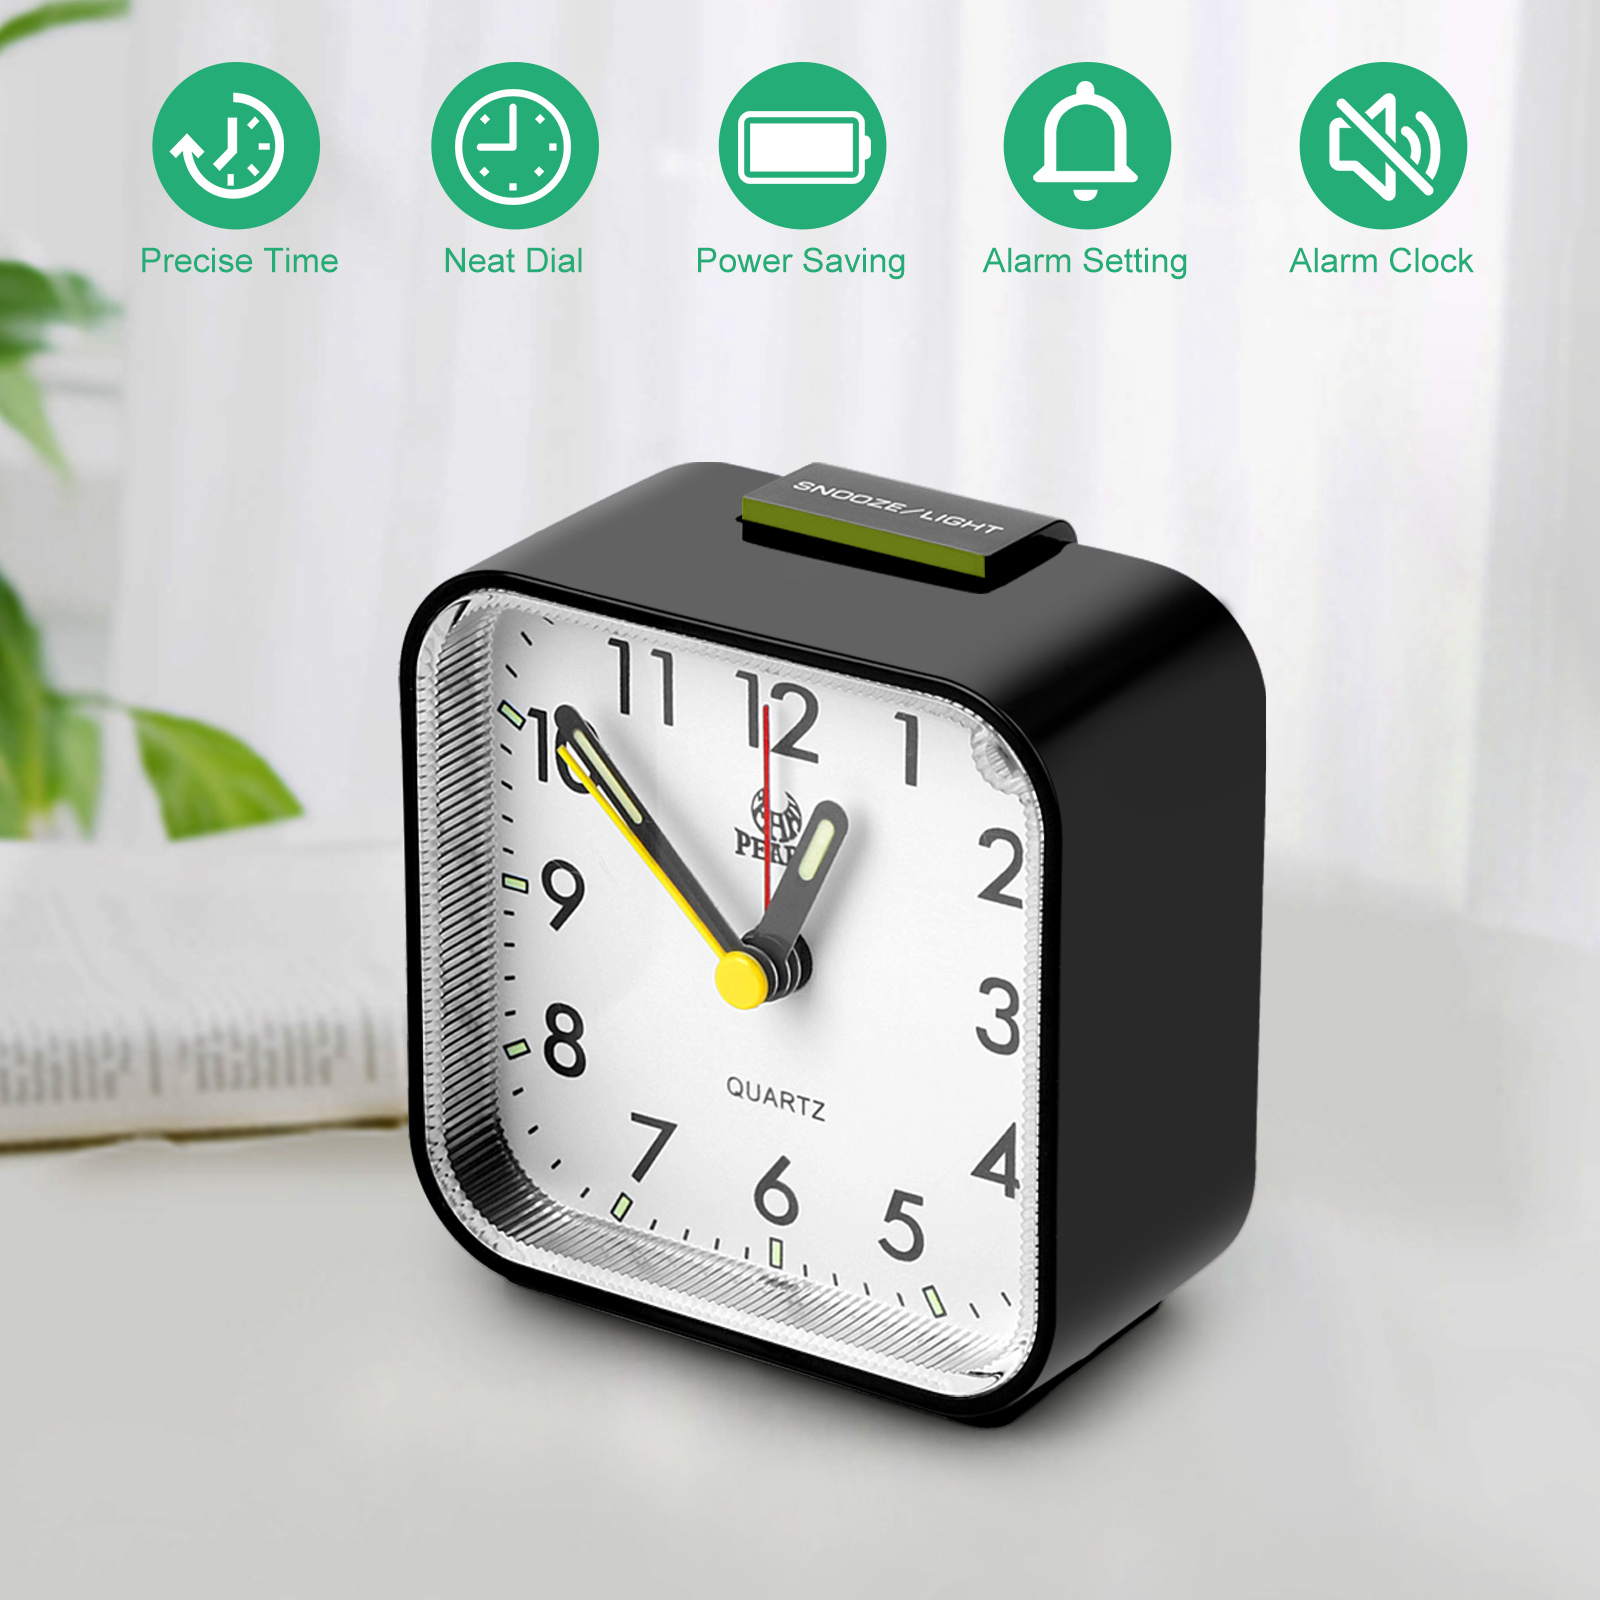 TSV Old-Fashioned Alarm Clock, Mini Battery Operated Analog Alarm Clock Square Travel Portable Alarm Clock, Compact & Lightweight Bedside Clock with Snooze Timed for Teenager, Elderly, Travelers - image 2 of 9